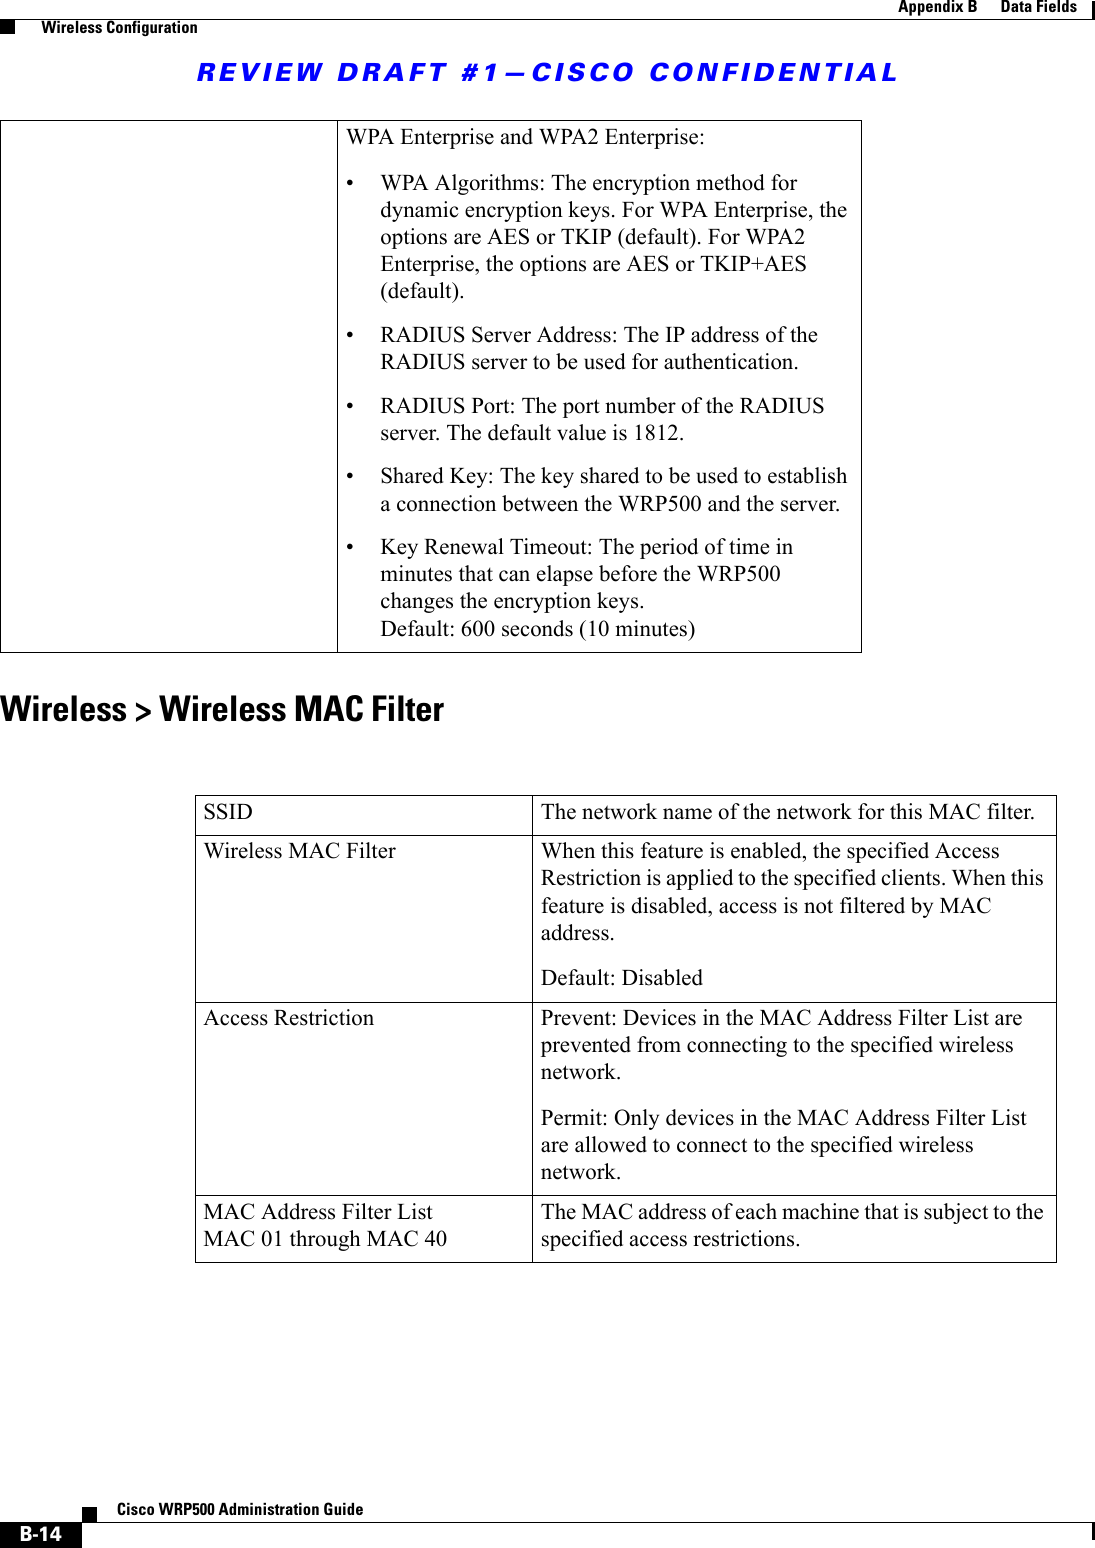 REVIEW DRAFT #1—CISCO CONFIDENTIALB-14Cisco WRP500 Administration Guide Appendix B      Data Fields  Wireless ConfigurationWireless &gt; Wireless MAC FilterWPA Enterprise and WPA2 Enterprise:• WPA Algorithms: The encryption method for dynamic encryption keys. For WPA Enterprise, the options are AES or TKIP (default). For WPA2 Enterprise, the options are AES or TKIP+AES (default).• RADIUS Server Address: The IP address of the RADIUS server to be used for authentication.• RADIUS Port: The port number of the RADIUS server. The default value is 1812.• Shared Key: The key shared to be used to establish a connection between the WRP500 and the server.• Key Renewal Timeout: The period of time in minutes that can elapse before the WRP500 changes the encryption keys. Default: 600 seconds (10 minutes)SSID The network name of the network for this MAC filter.Wireless MAC Filter When this feature is enabled, the specified Access Restriction is applied to the specified clients. When this feature is disabled, access is not filtered by MAC address.Default: DisabledAccess Restriction Prevent: Devices in the MAC Address Filter List are prevented from connecting to the specified wireless network.Permit: Only devices in the MAC Address Filter List are allowed to connect to the specified wireless network.MAC Address Filter ListMAC 01 through MAC 40The MAC address of each machine that is subject to the specified access restrictions.